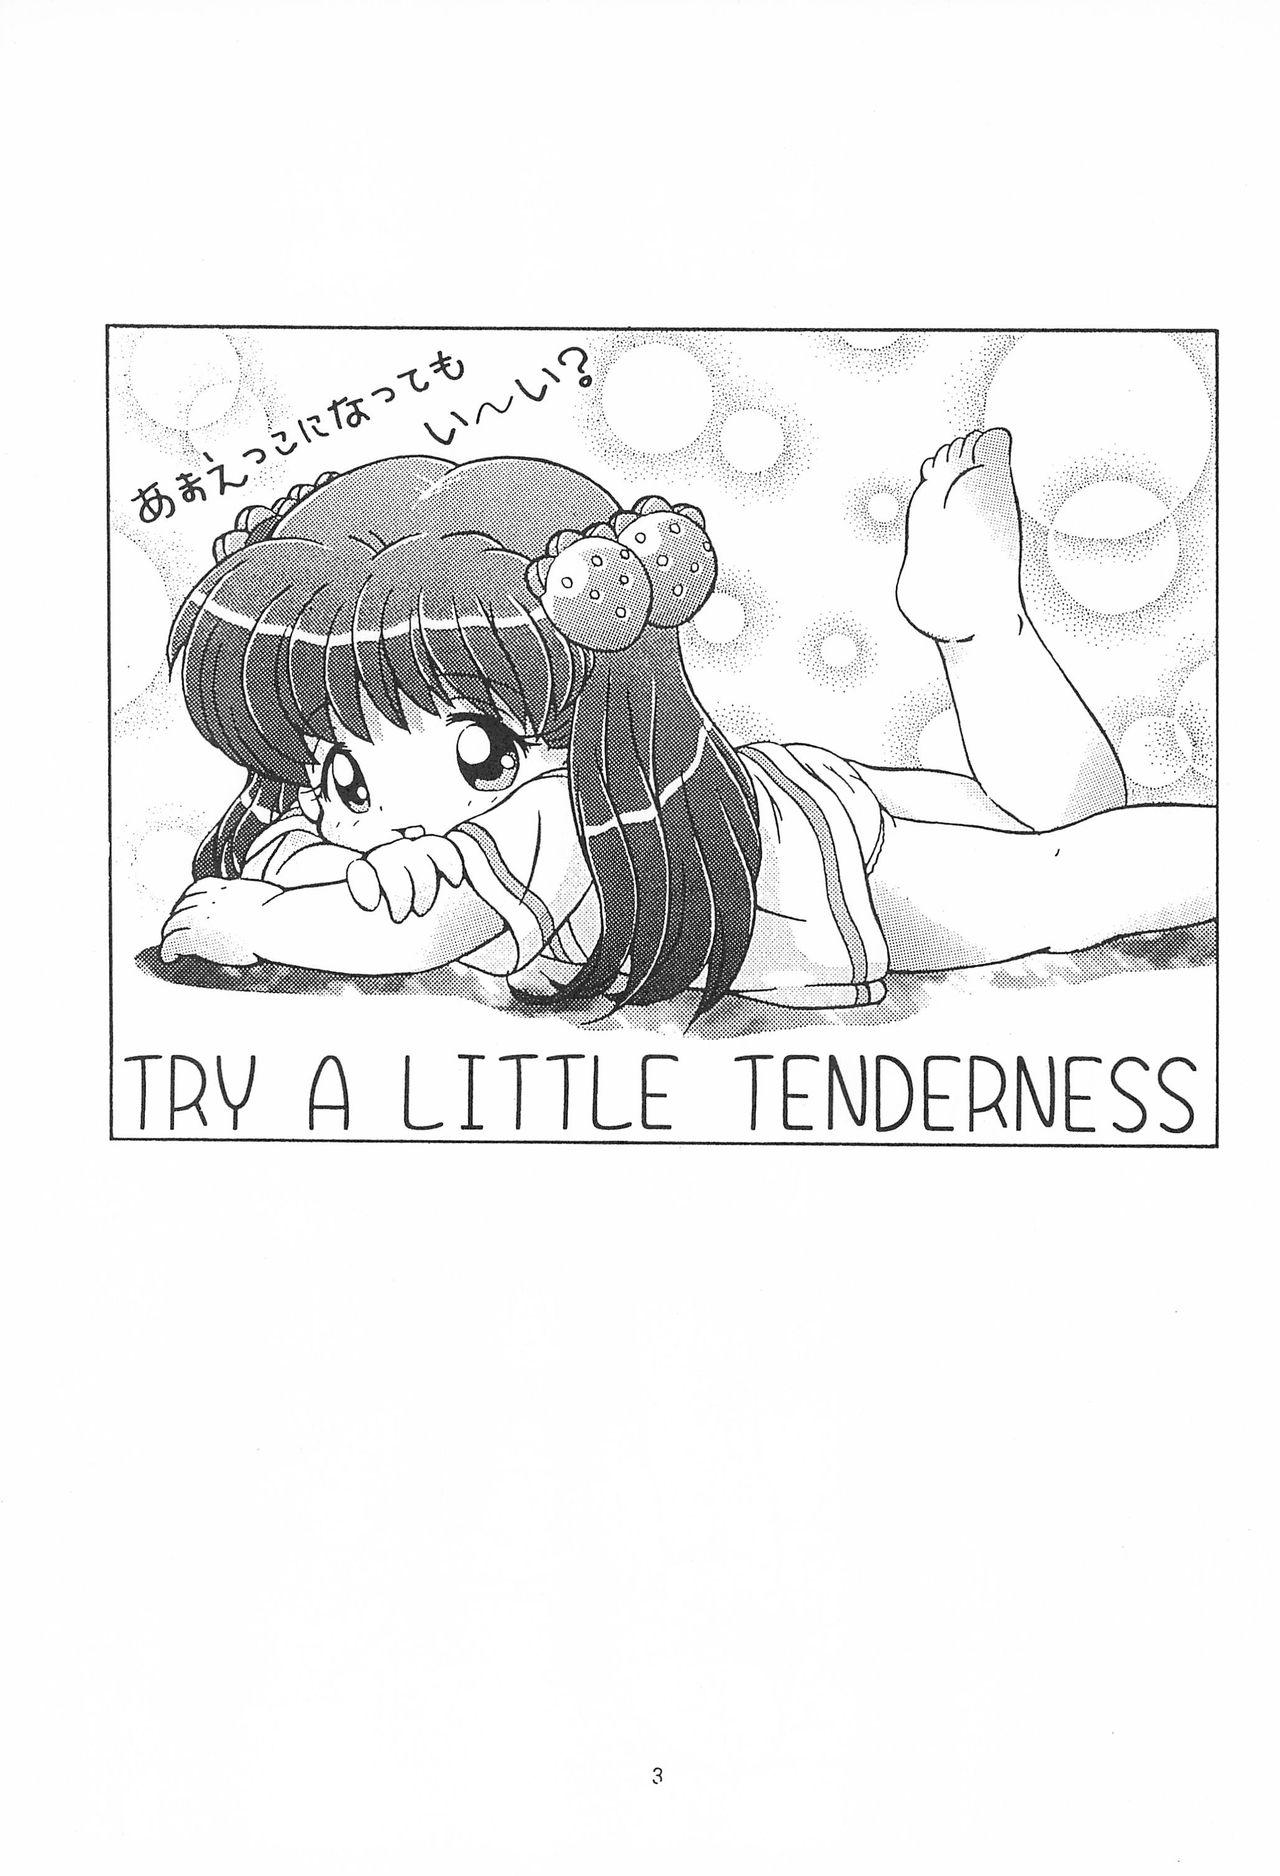 TRY A LITTLE TENDERNESS 4